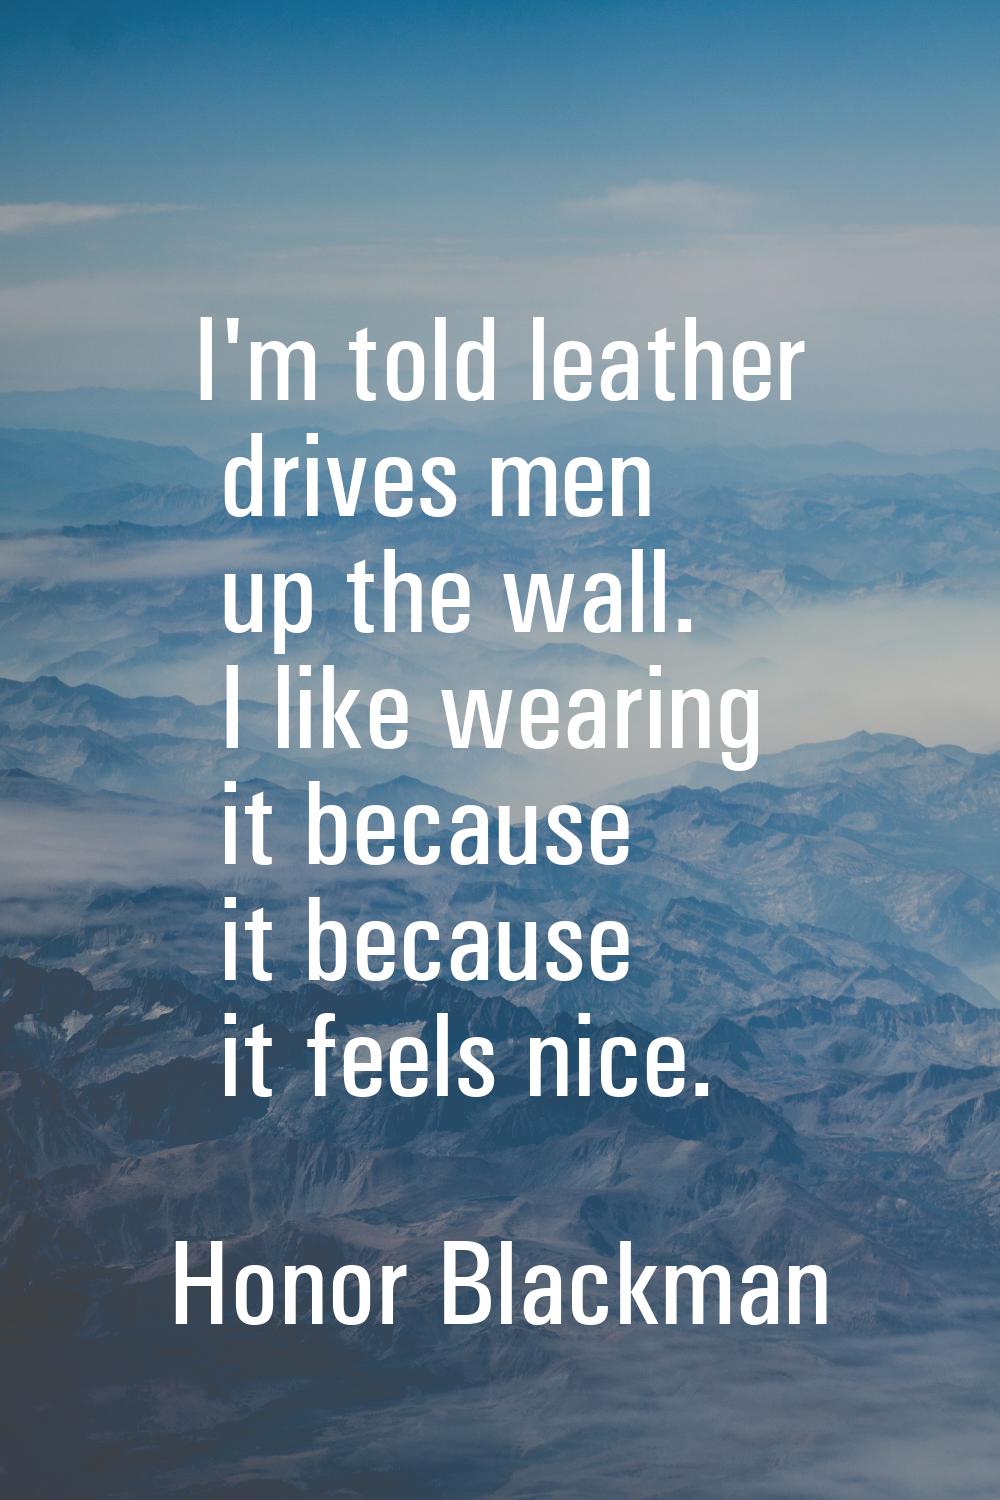 I'm told leather drives men up the wall. I like wearing it because it because it feels nice.